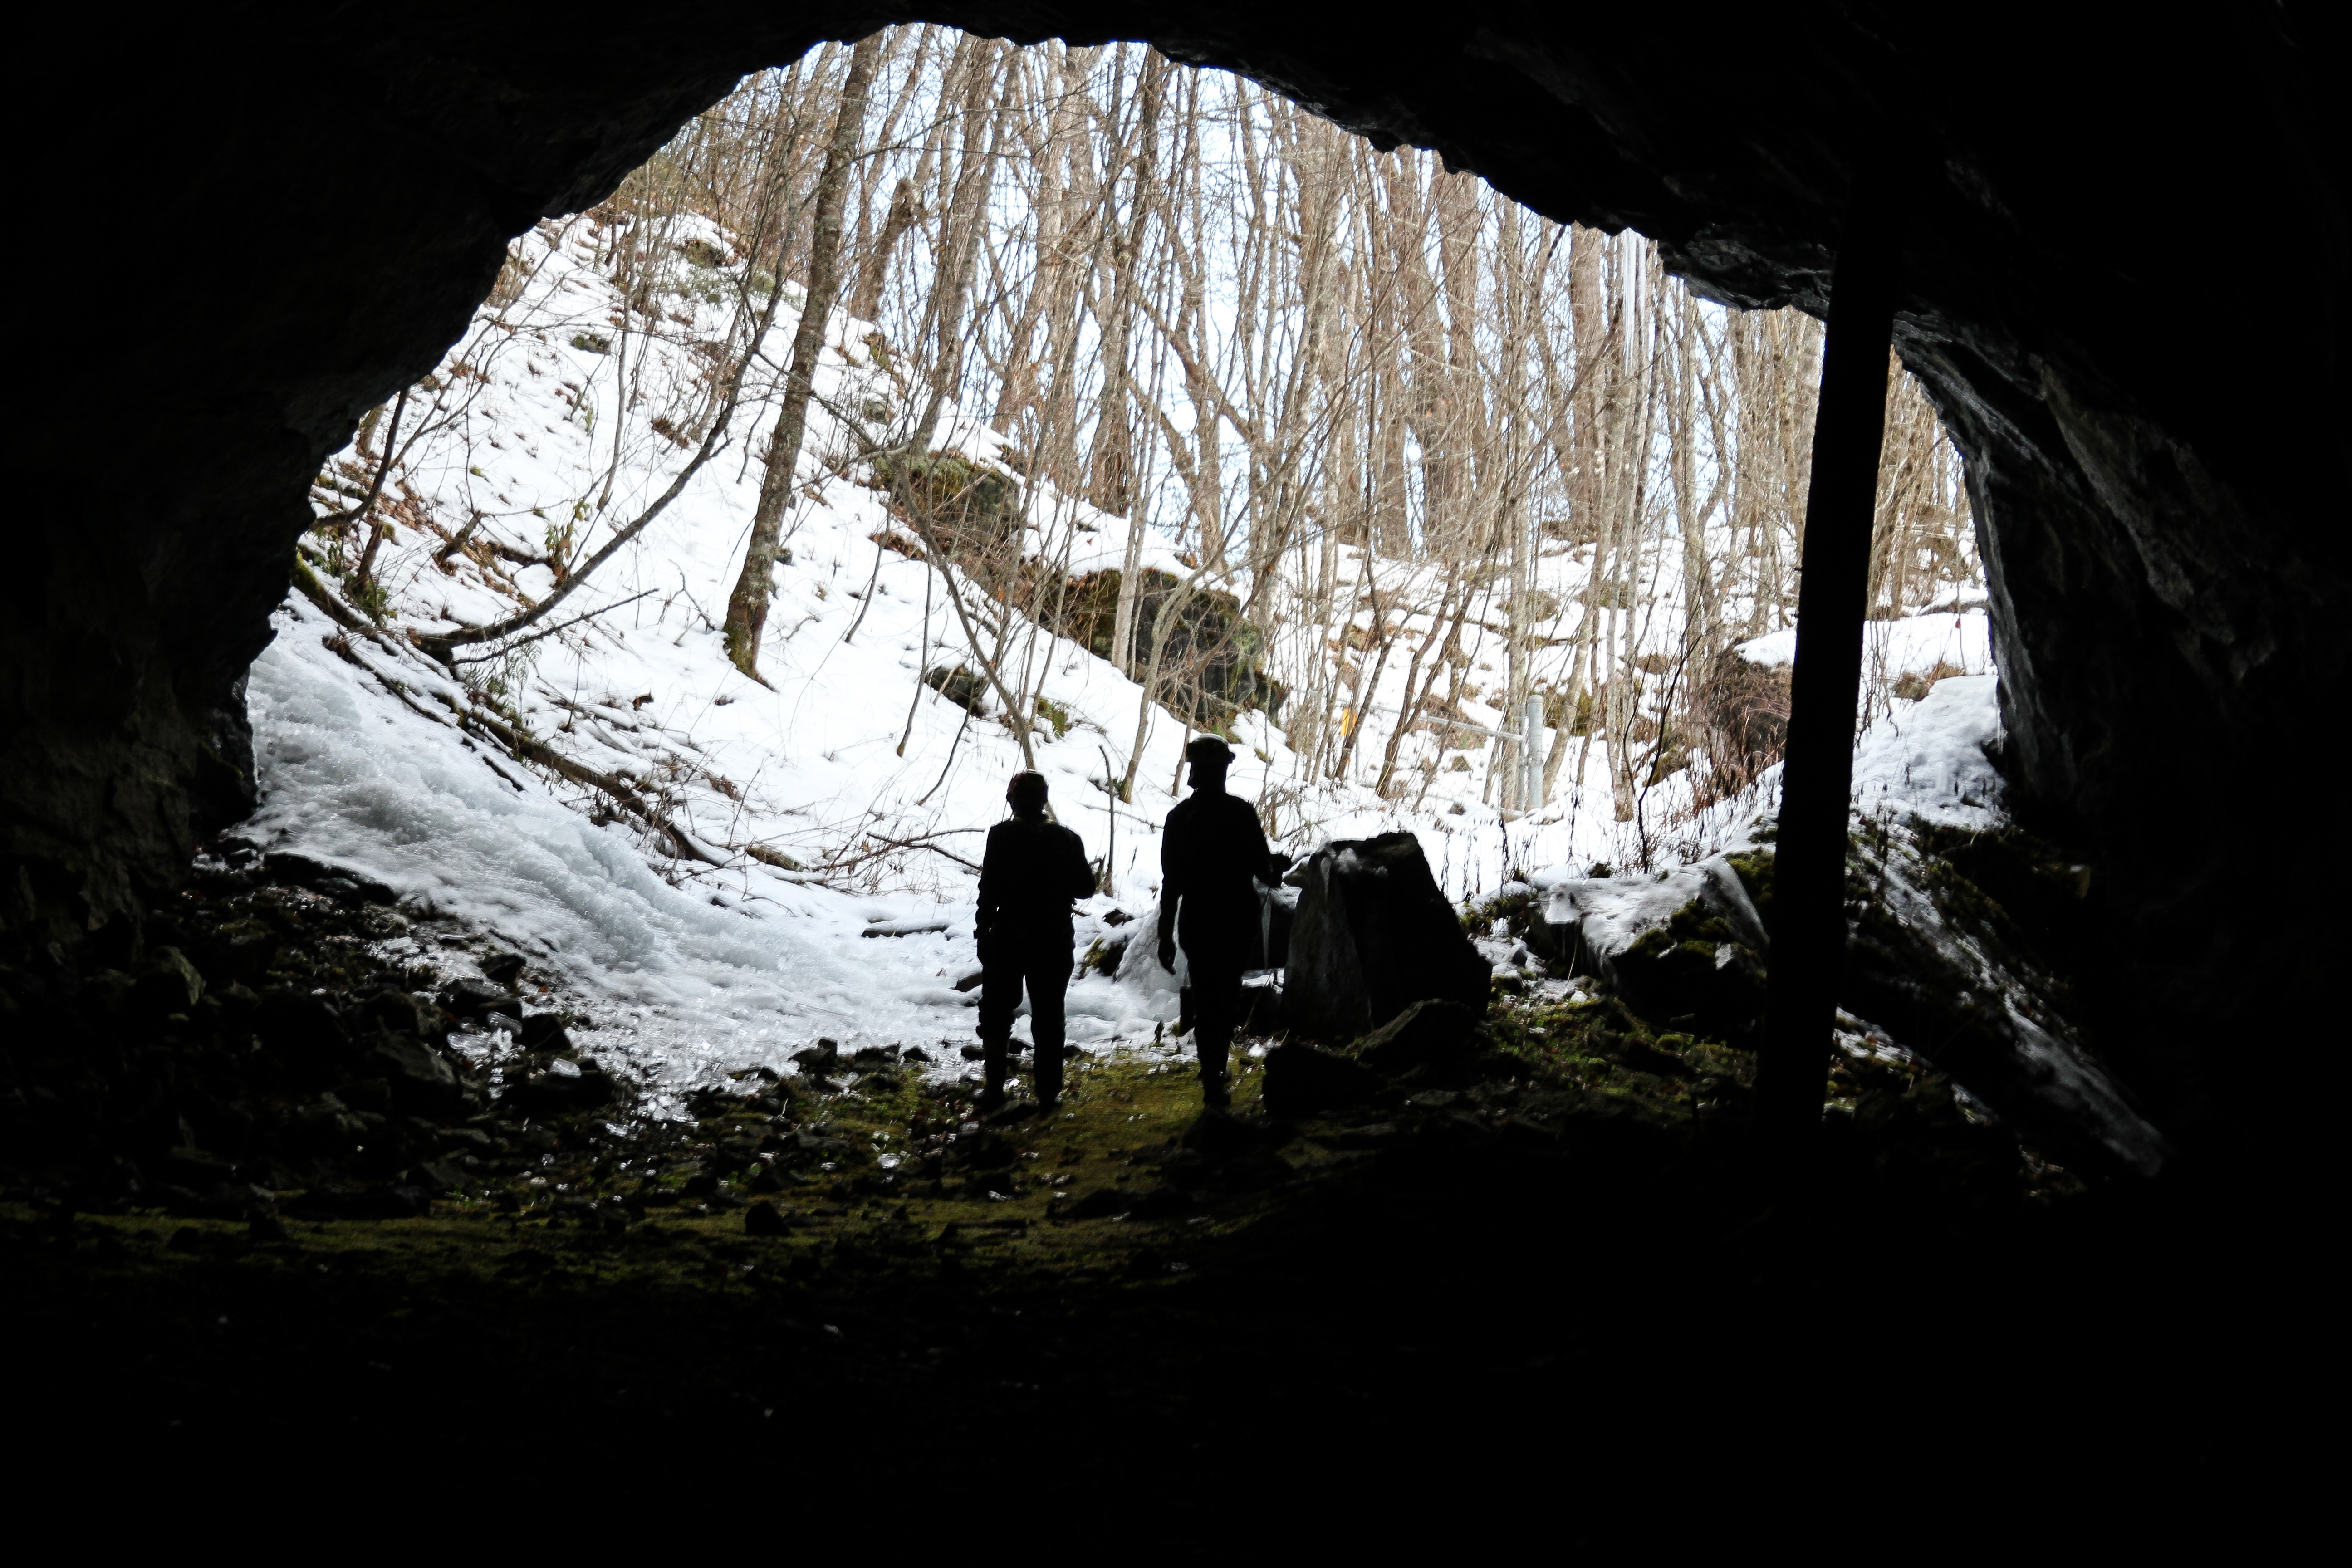 Two people exiting through the mouth of a mine, entering a snow-covered forest